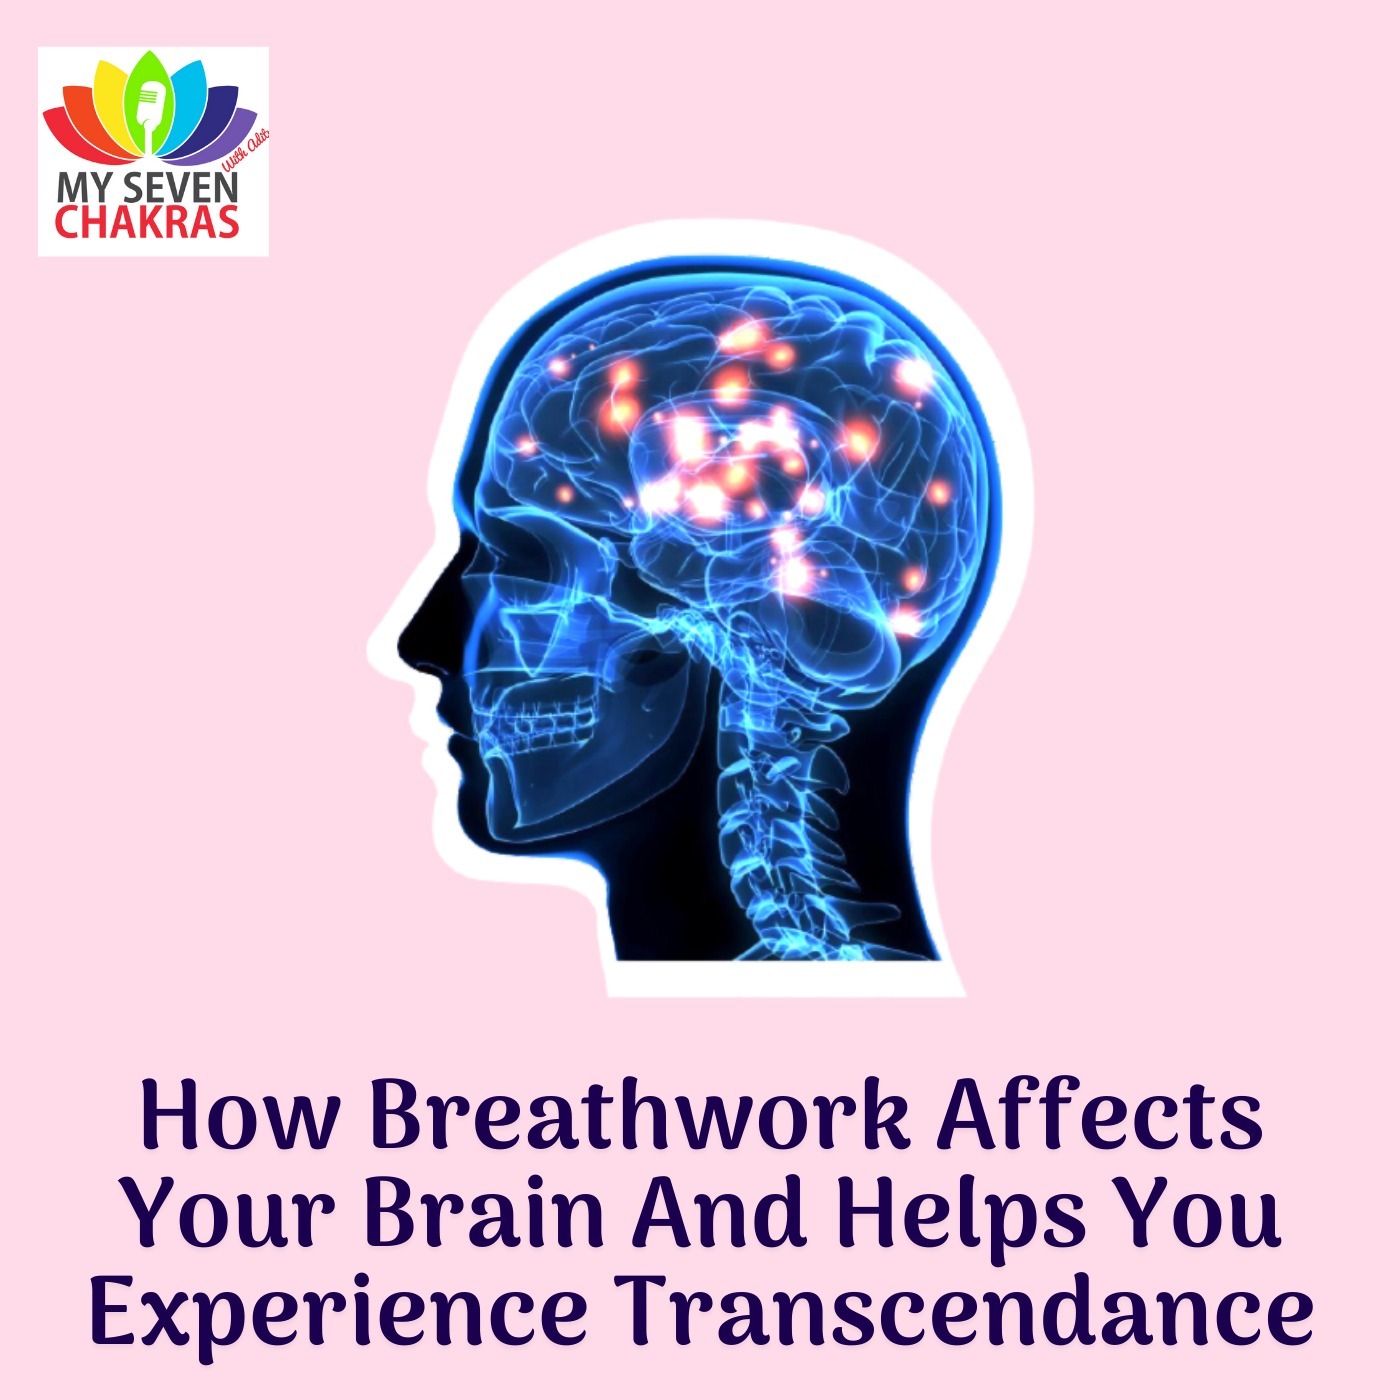 How Breathwork Affects Your Brain And Helps You Experience Transcendence